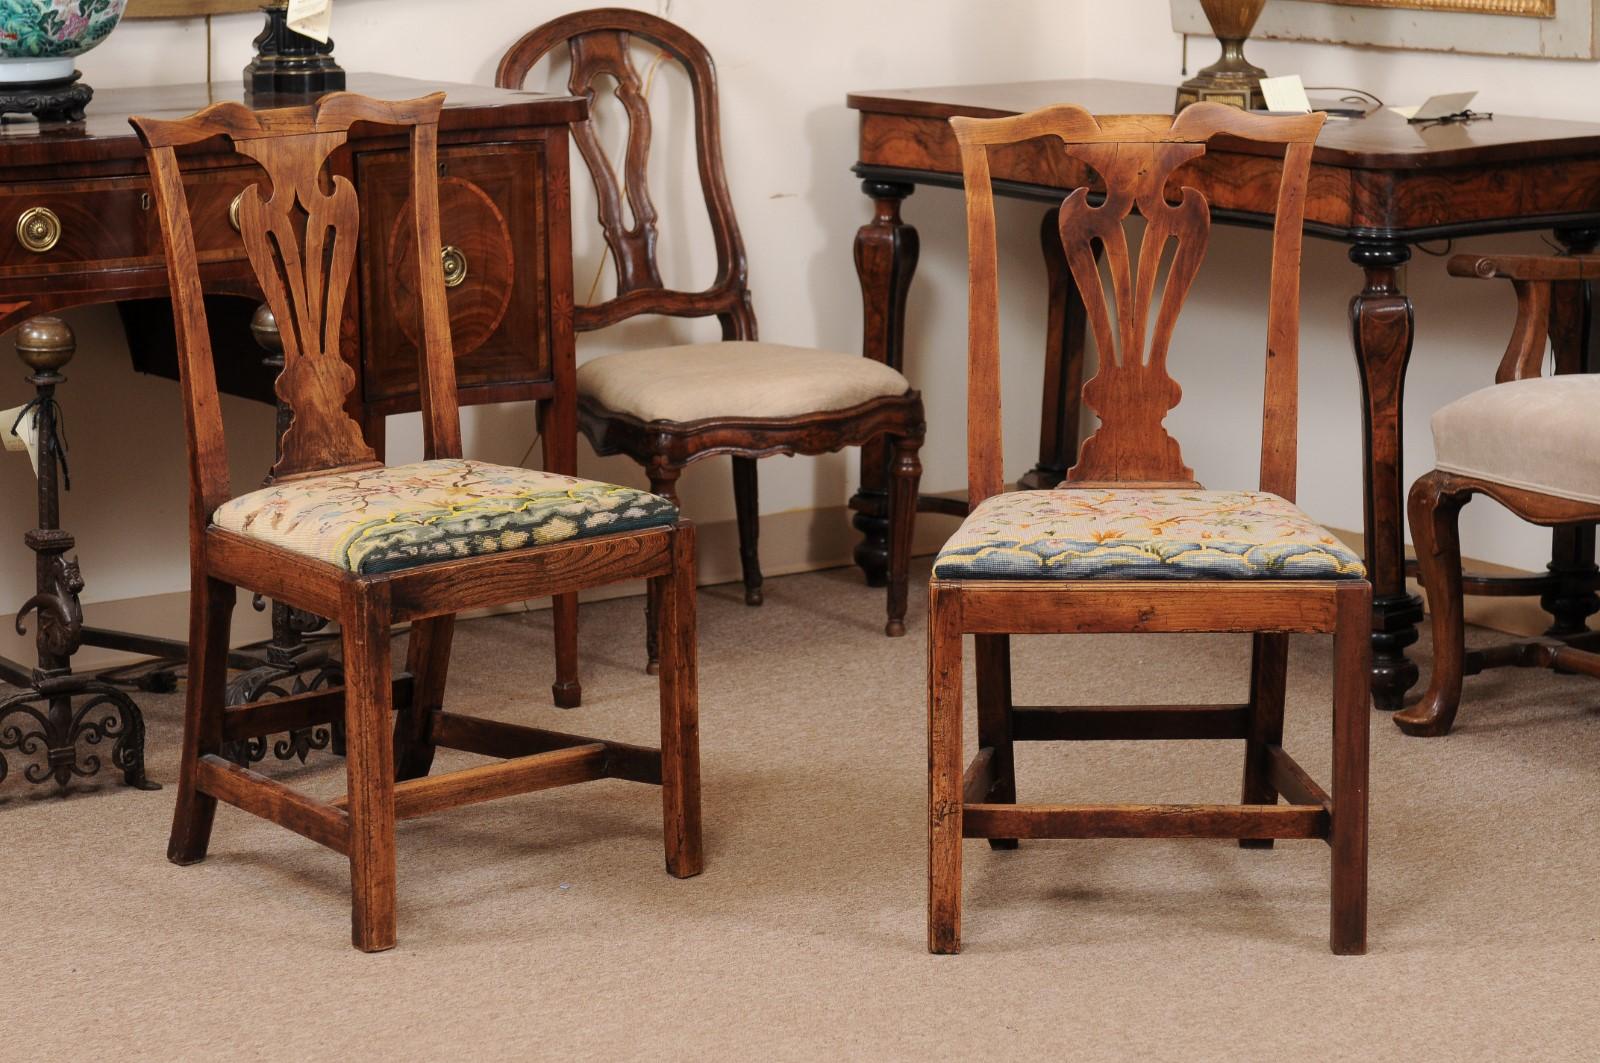 Pair of Chippendale Style Side Chairs in Elm with Needlepoint Slip Seats, 19th Century England